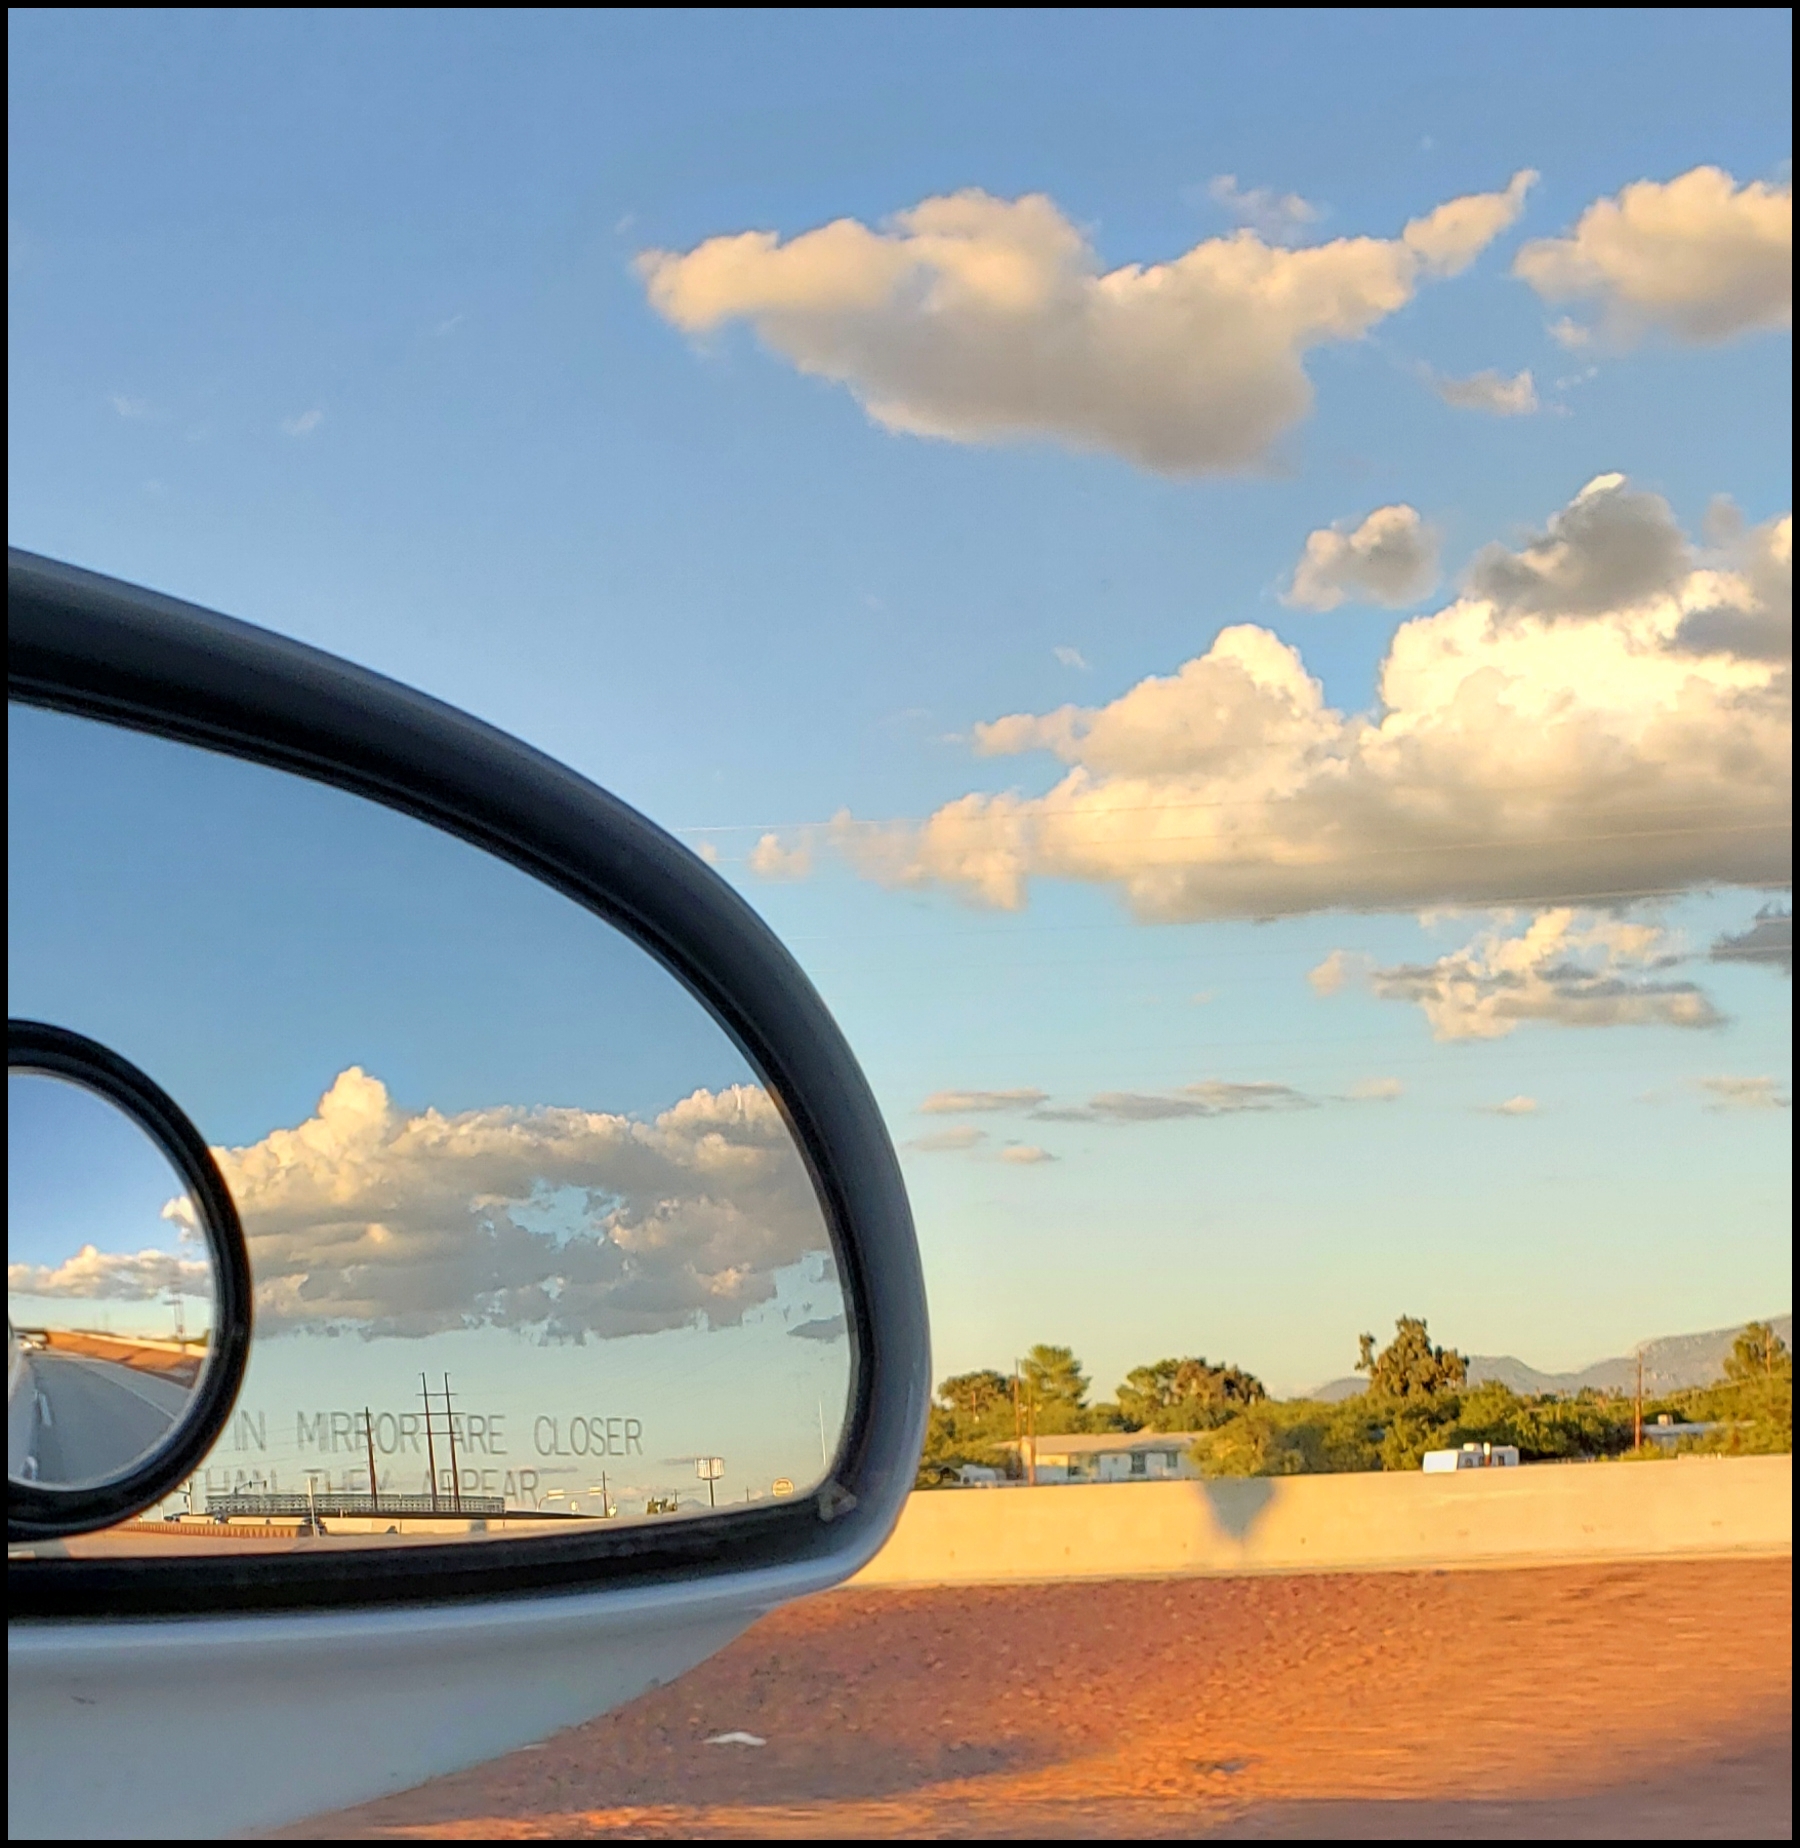 Sunset clouds in the car's rearview mirror